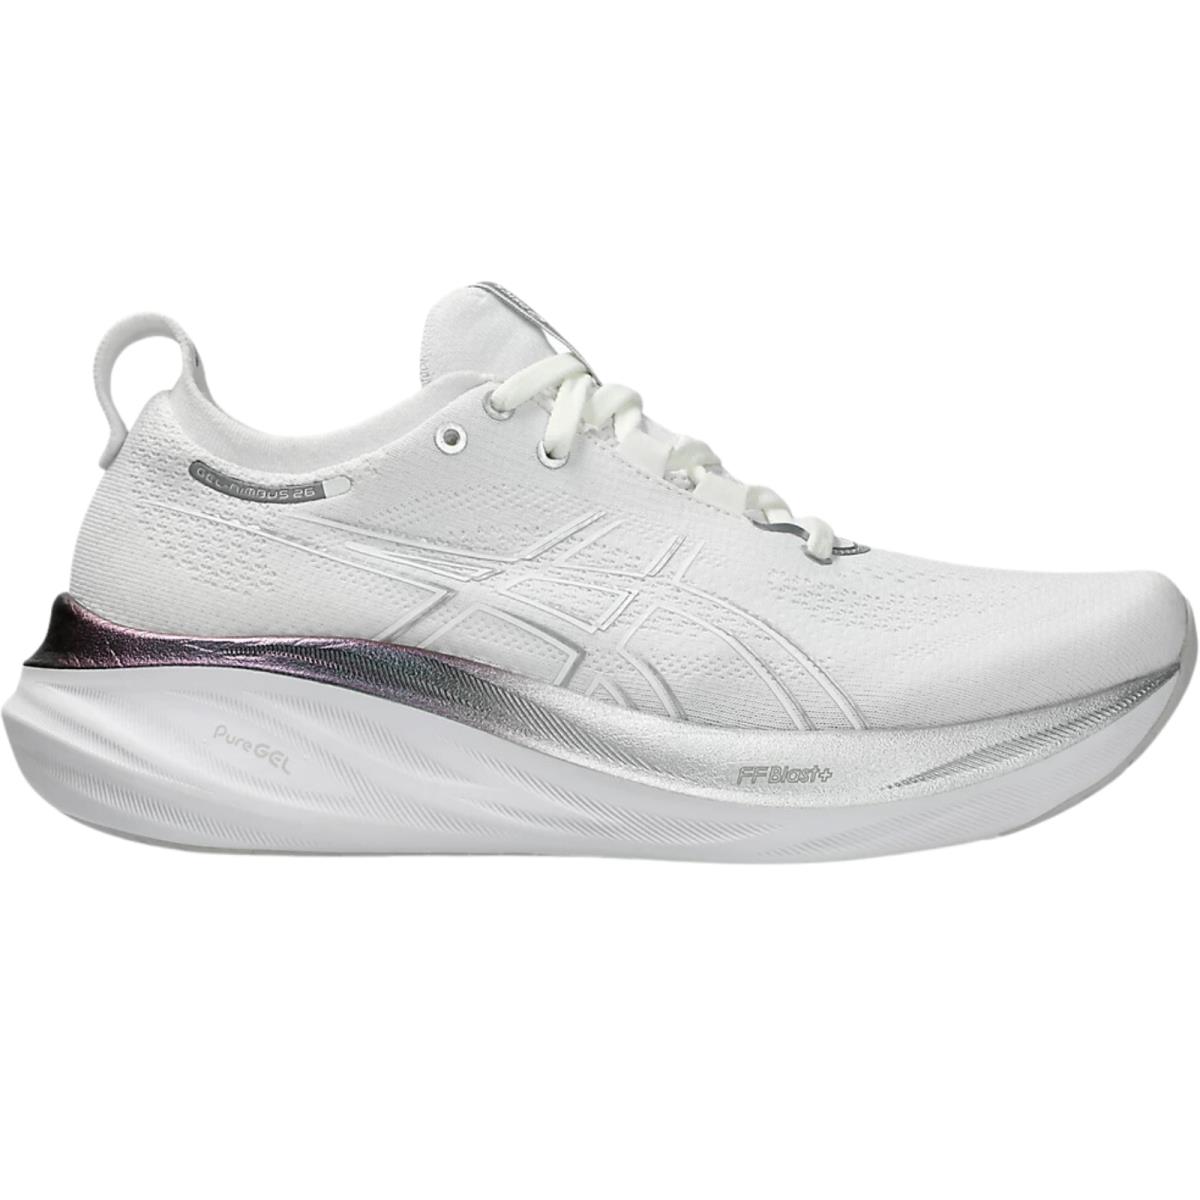 Asics Gel-nimbus 26 Women`s Running Shoes All Color US Sizes 6-11 Real White/Pure Silver